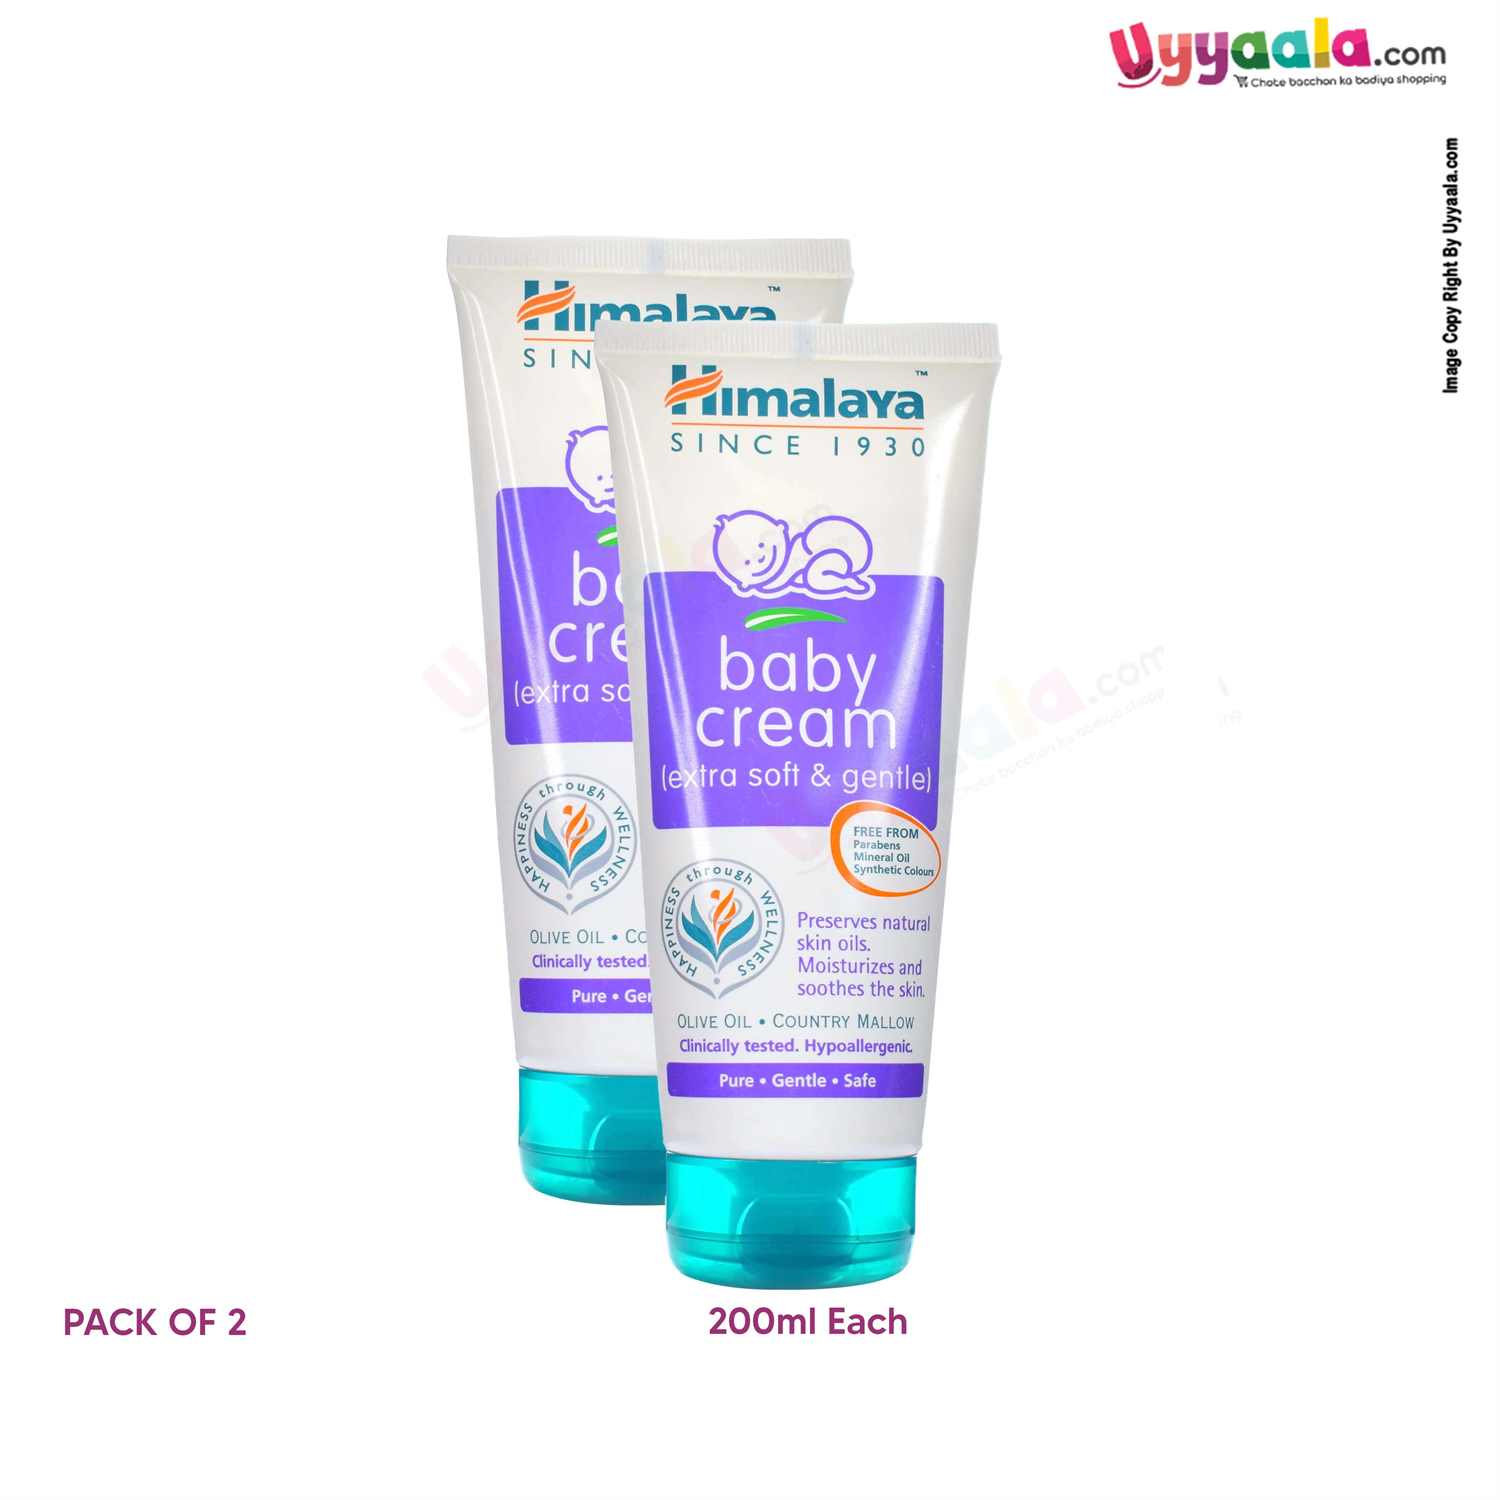 HIMALAYA Baby Cream Extra Soft & Gentle Pack of 2 (200ml Each)